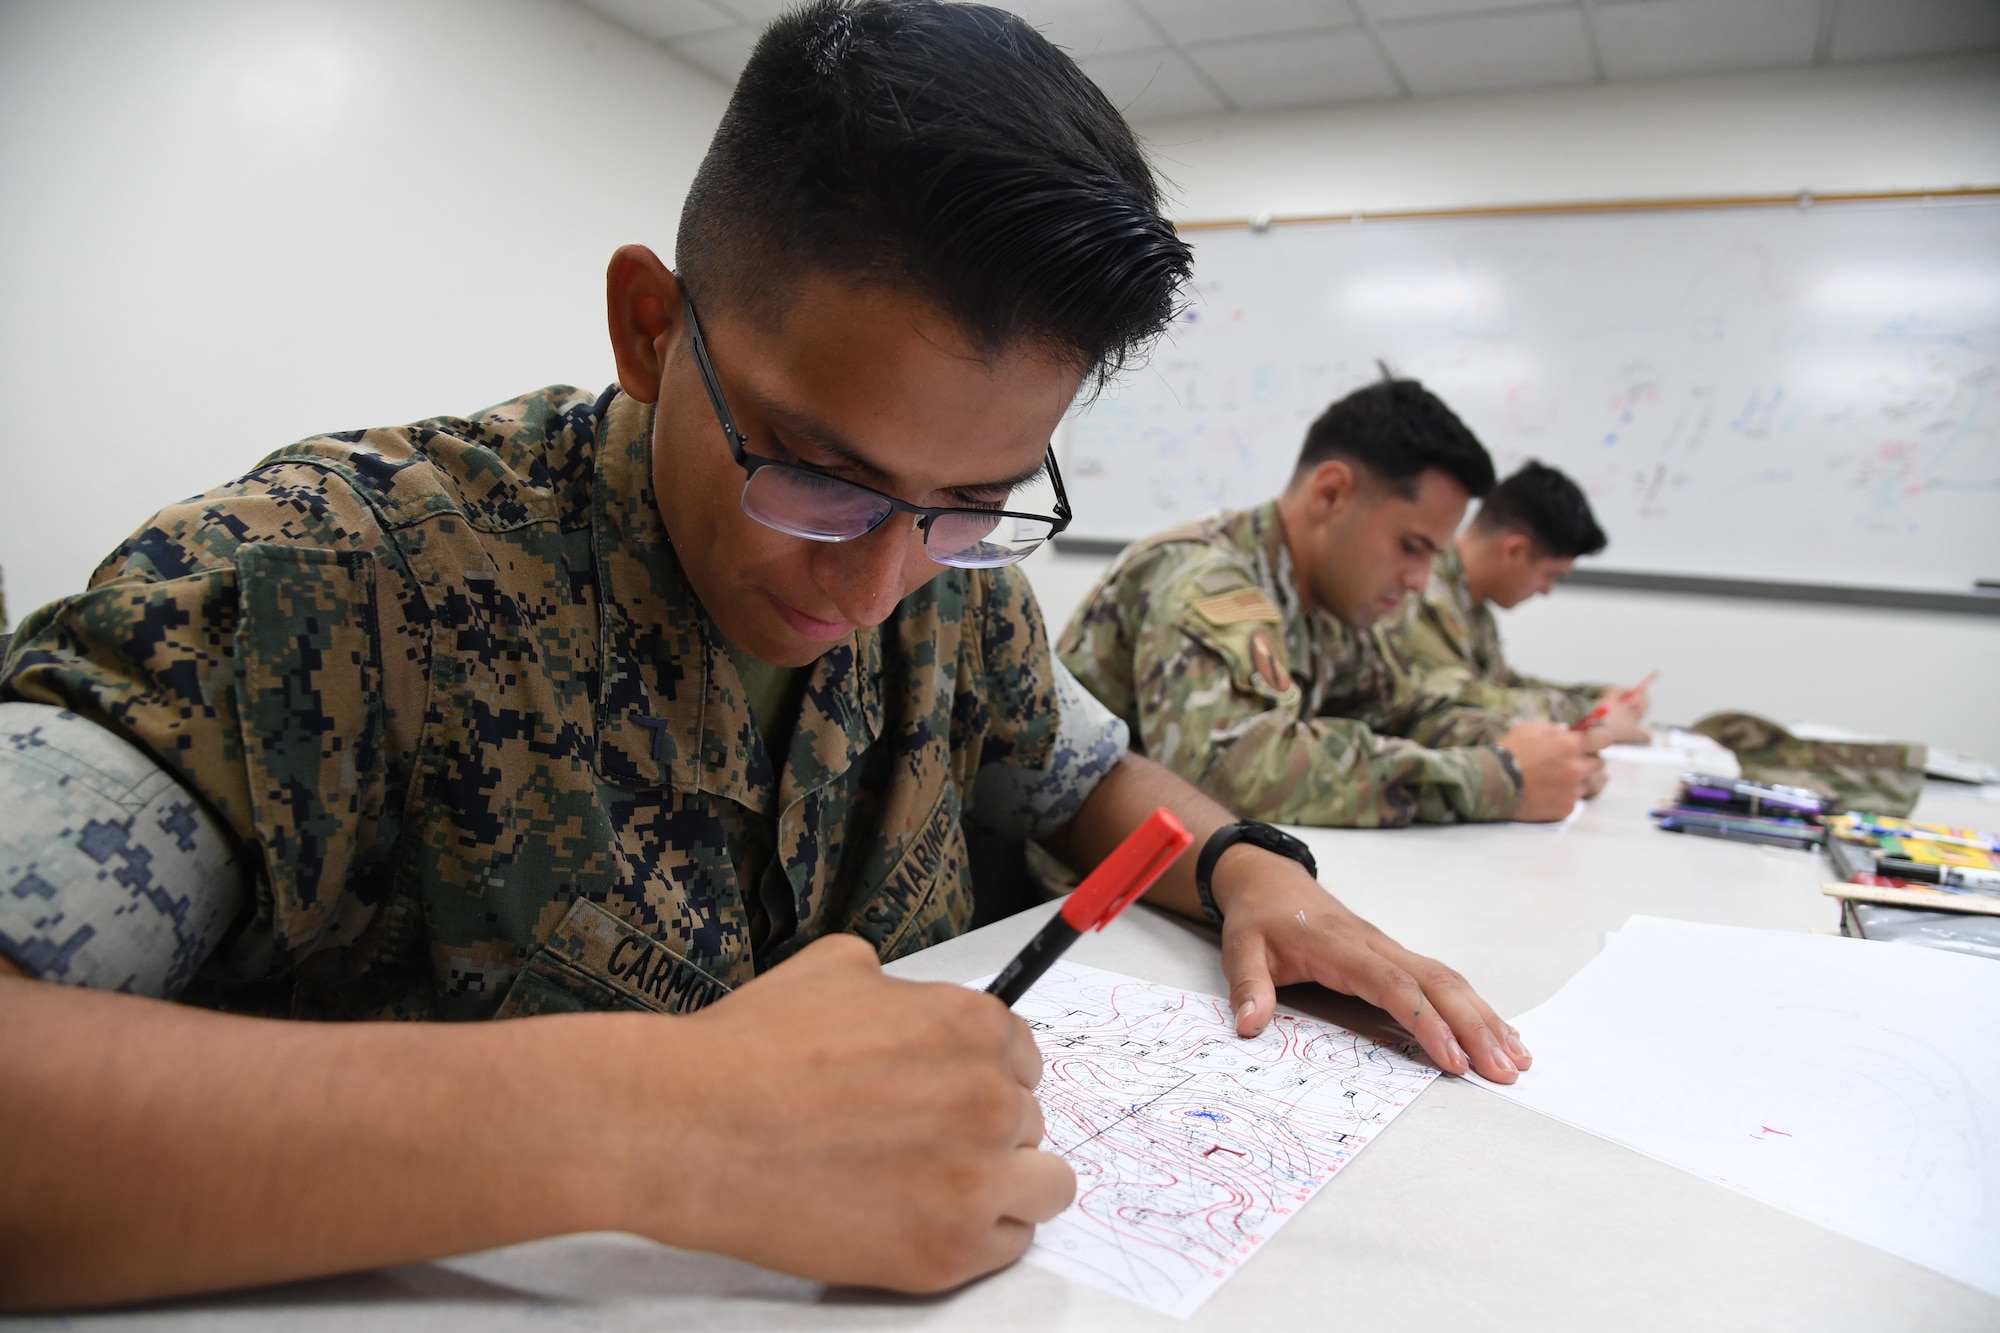 U.S. Marine Pfc. Christopher Carmona, Keesler Marine Detachment student, plots a weather chart during the weather initial skills course inside of the Joint Weather Training Facility at Keesler Air Force Base, Mississippi, July 21, 2022. The weather apprentice course, which graduated 650 students this past year, takes 151 academic days to complete. Approximately 7,400 students go through the 335th TRS's 13 Air Force Specialty Codes each year. (U.S. Air Force photo by Kemberly Groue)